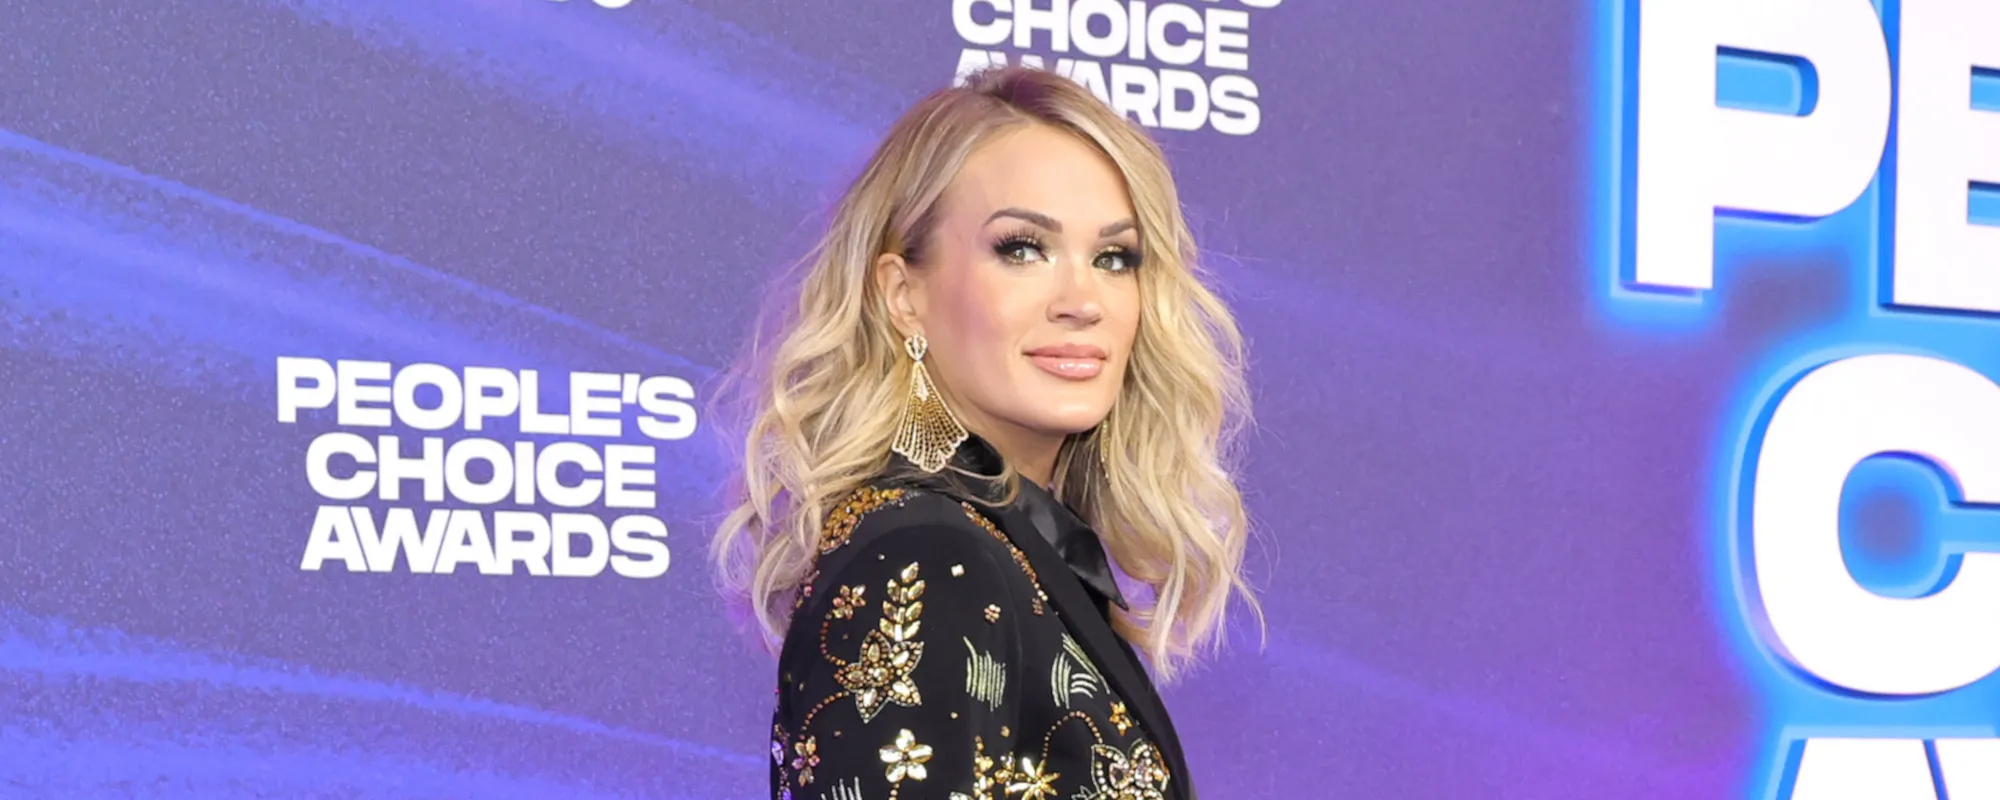 Carrie Underwood Announces Launch of Her Own SiriusXM Station